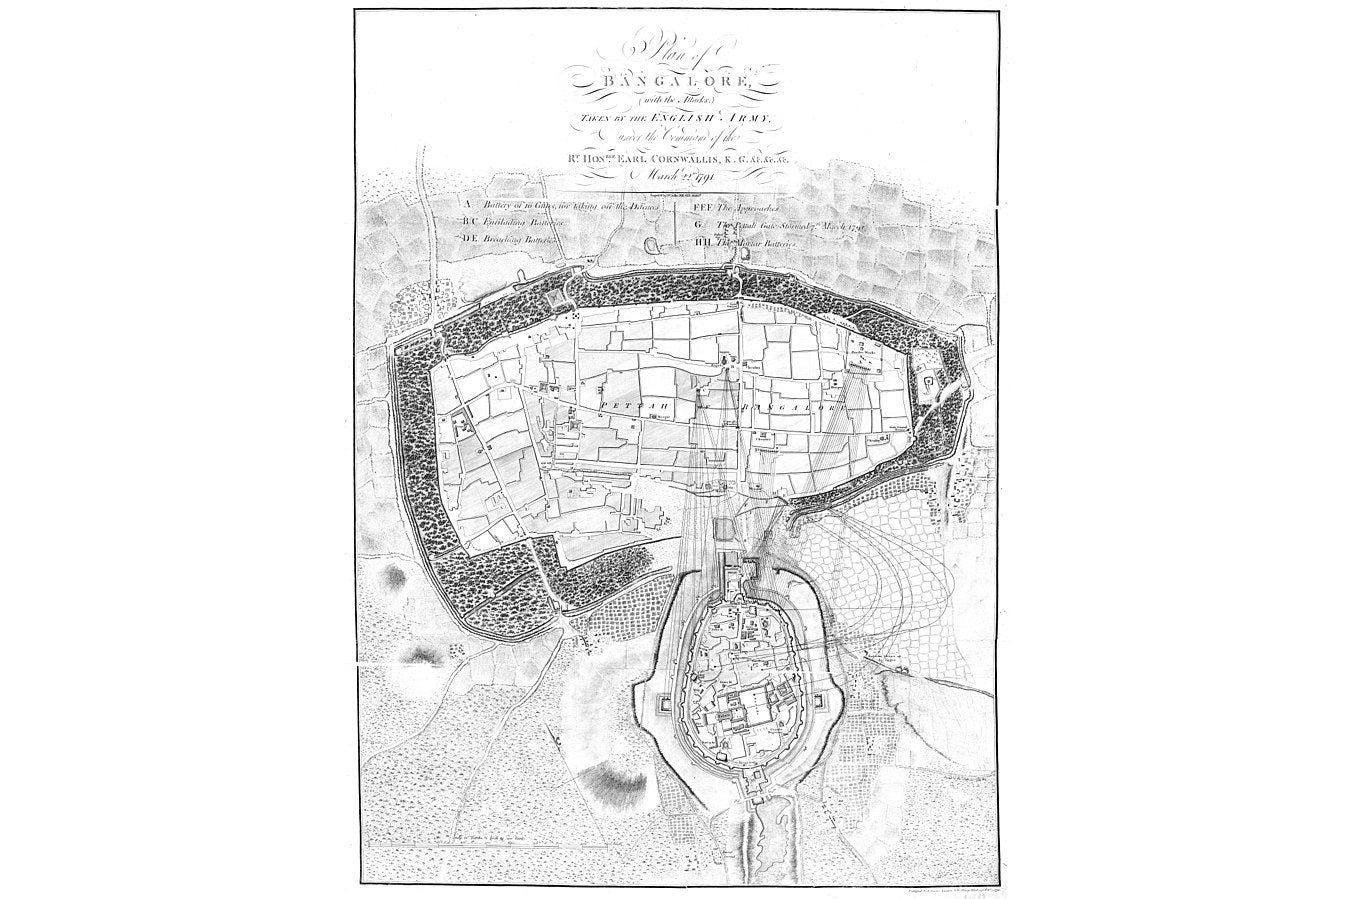 Plan of the Siege of Bangalore by Lord Cornwallis